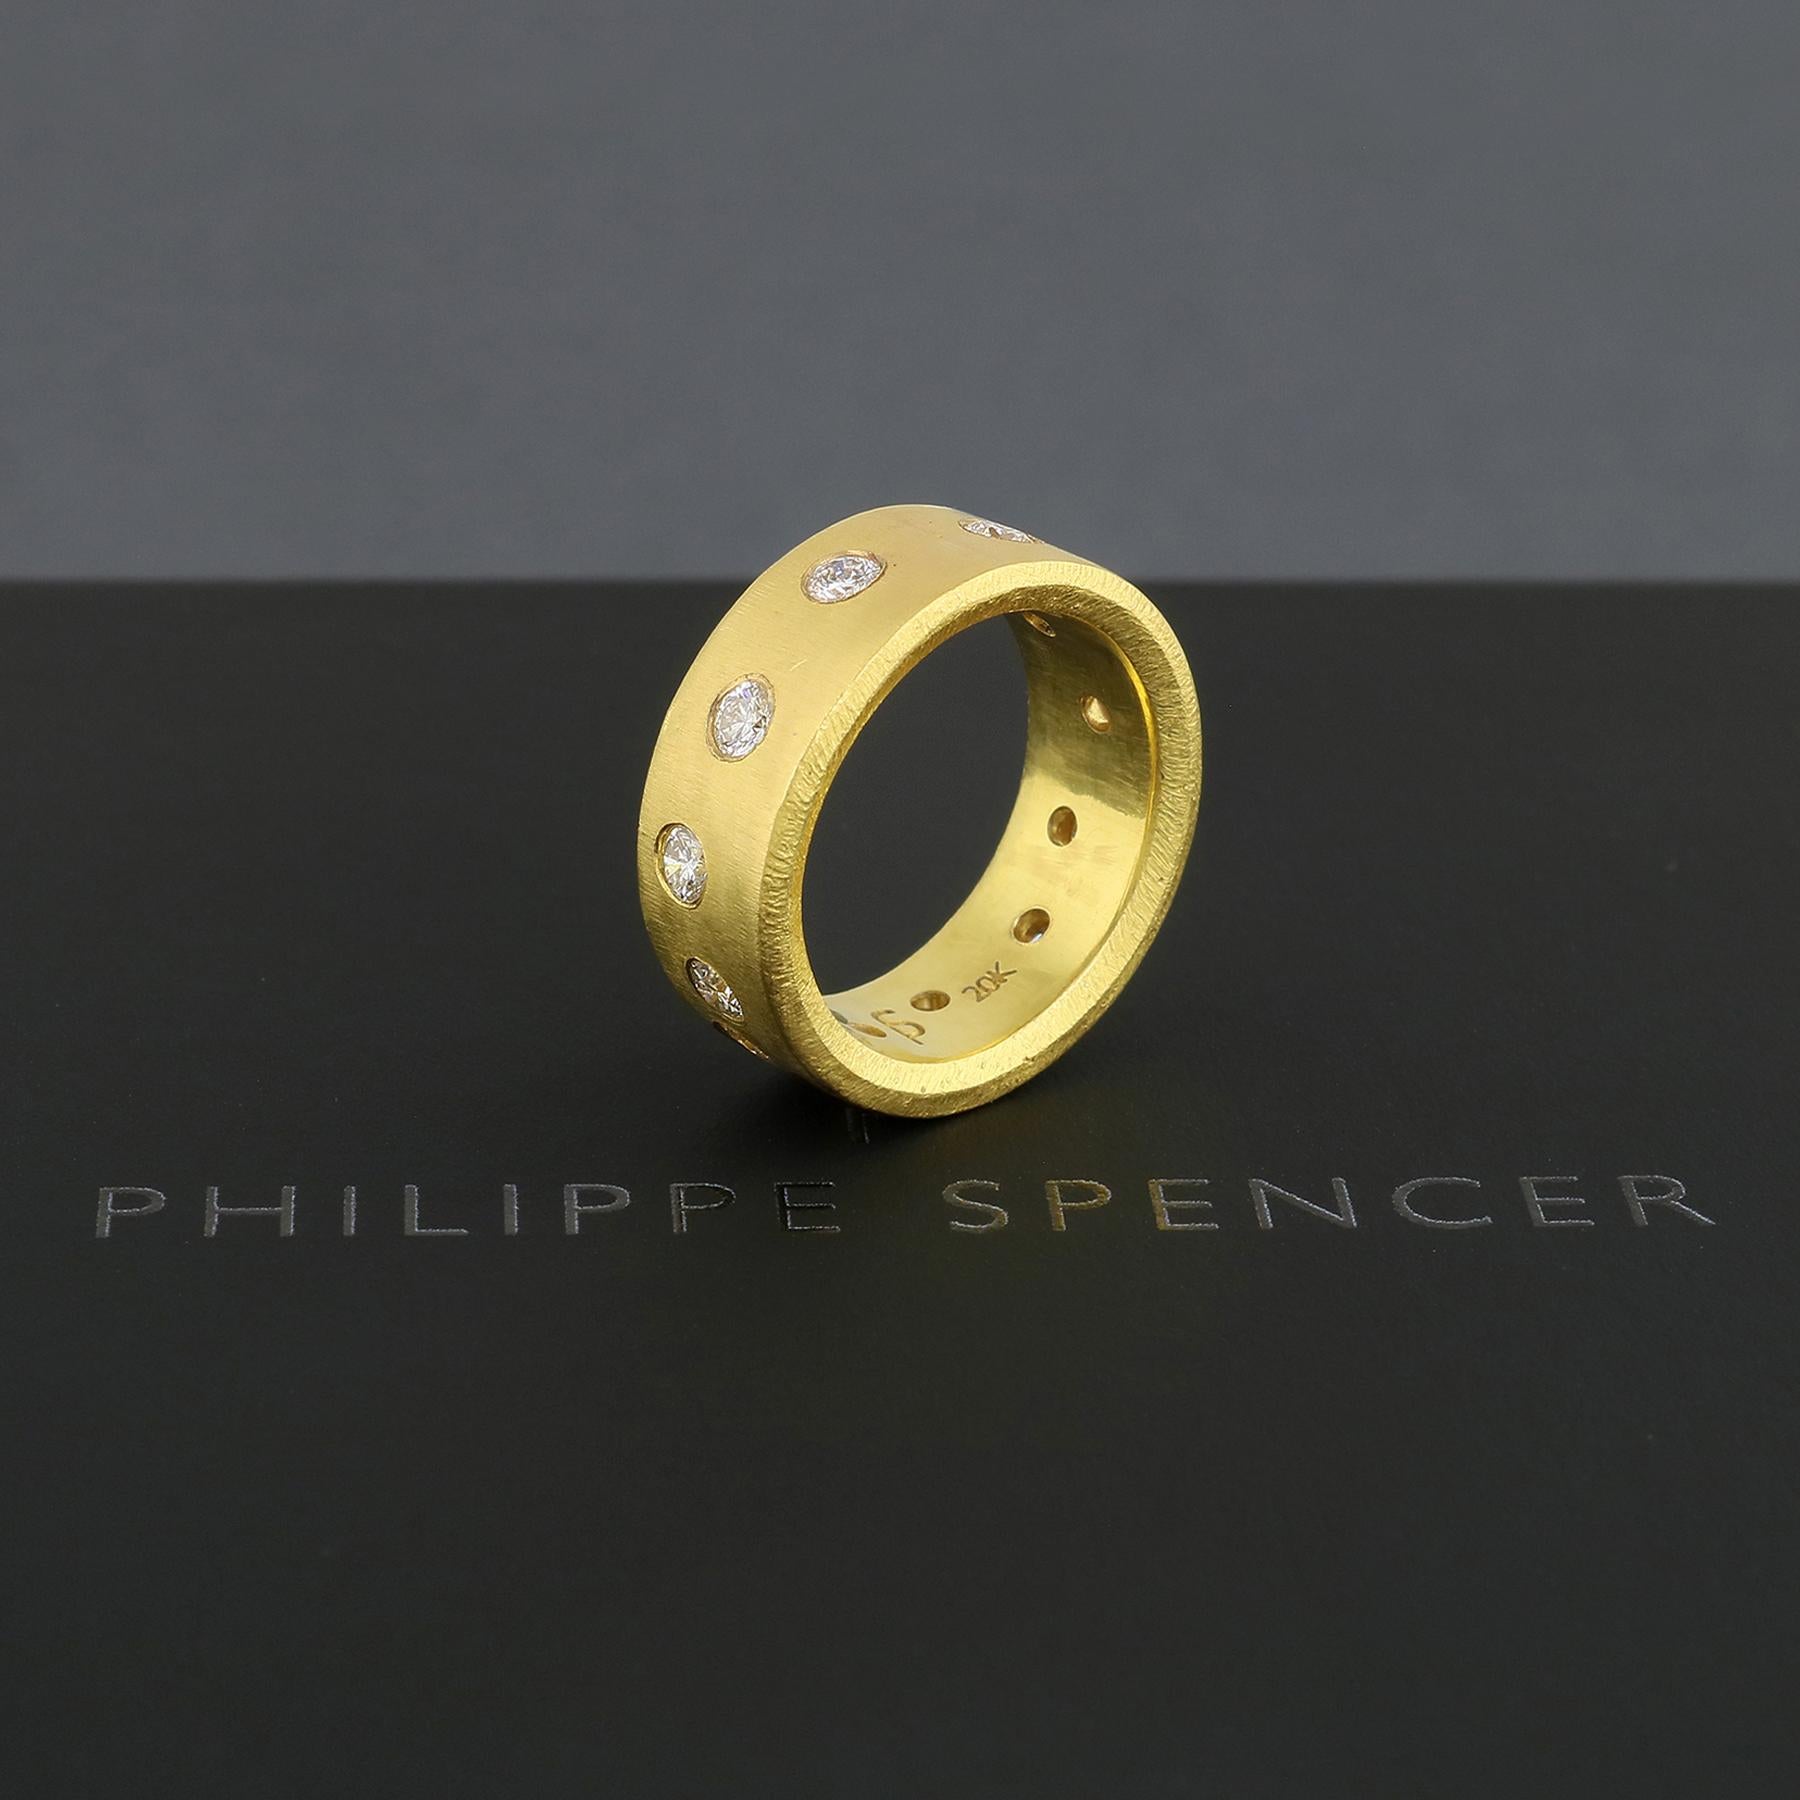 PHILIPPE SPENCER - 8 X 2mm Solid 20K Gold Completely Hand -Forged Statement Band with 12 Colorless (D-F)  2.8mm (1.03 Ct Total) Diamonds. 